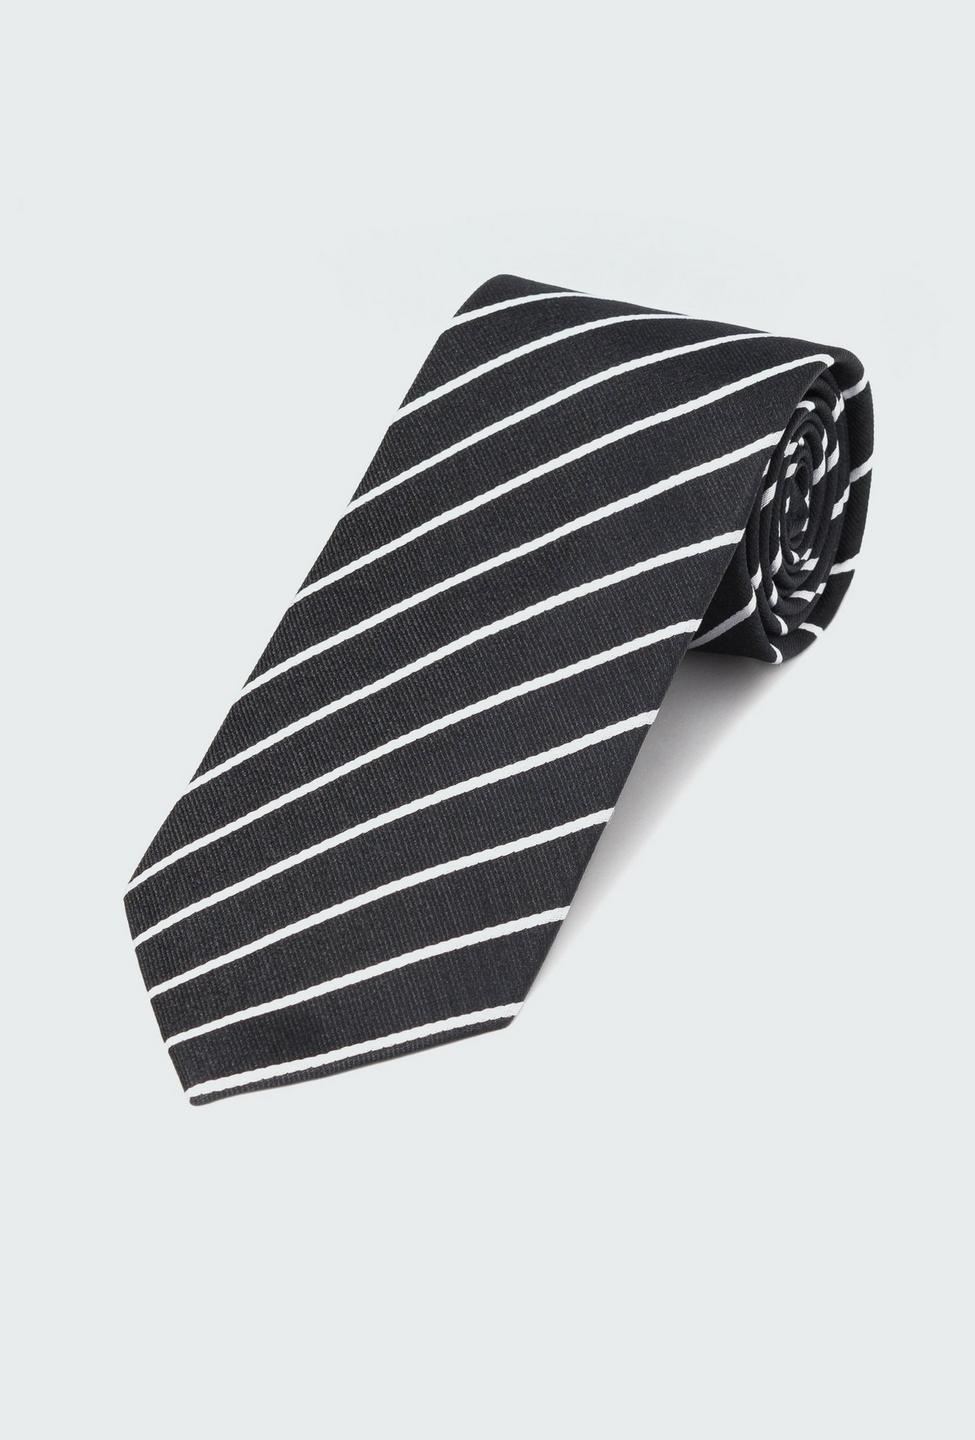 Black tie - Striped Design from Indochino Collection